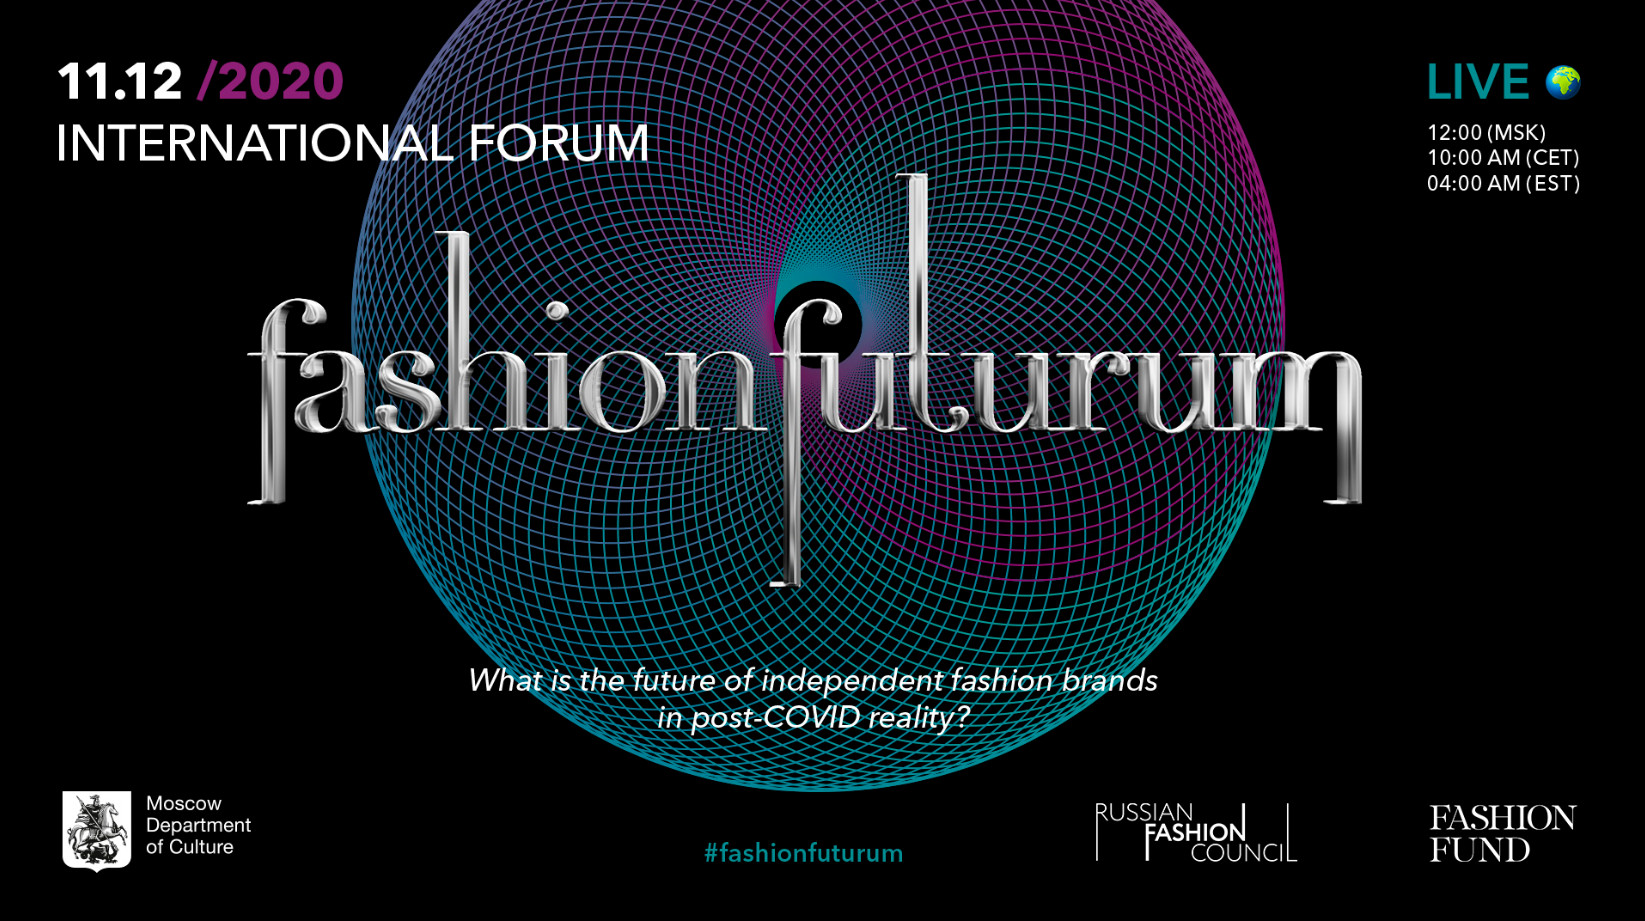 International fashion futurum forum is taking place in moscow